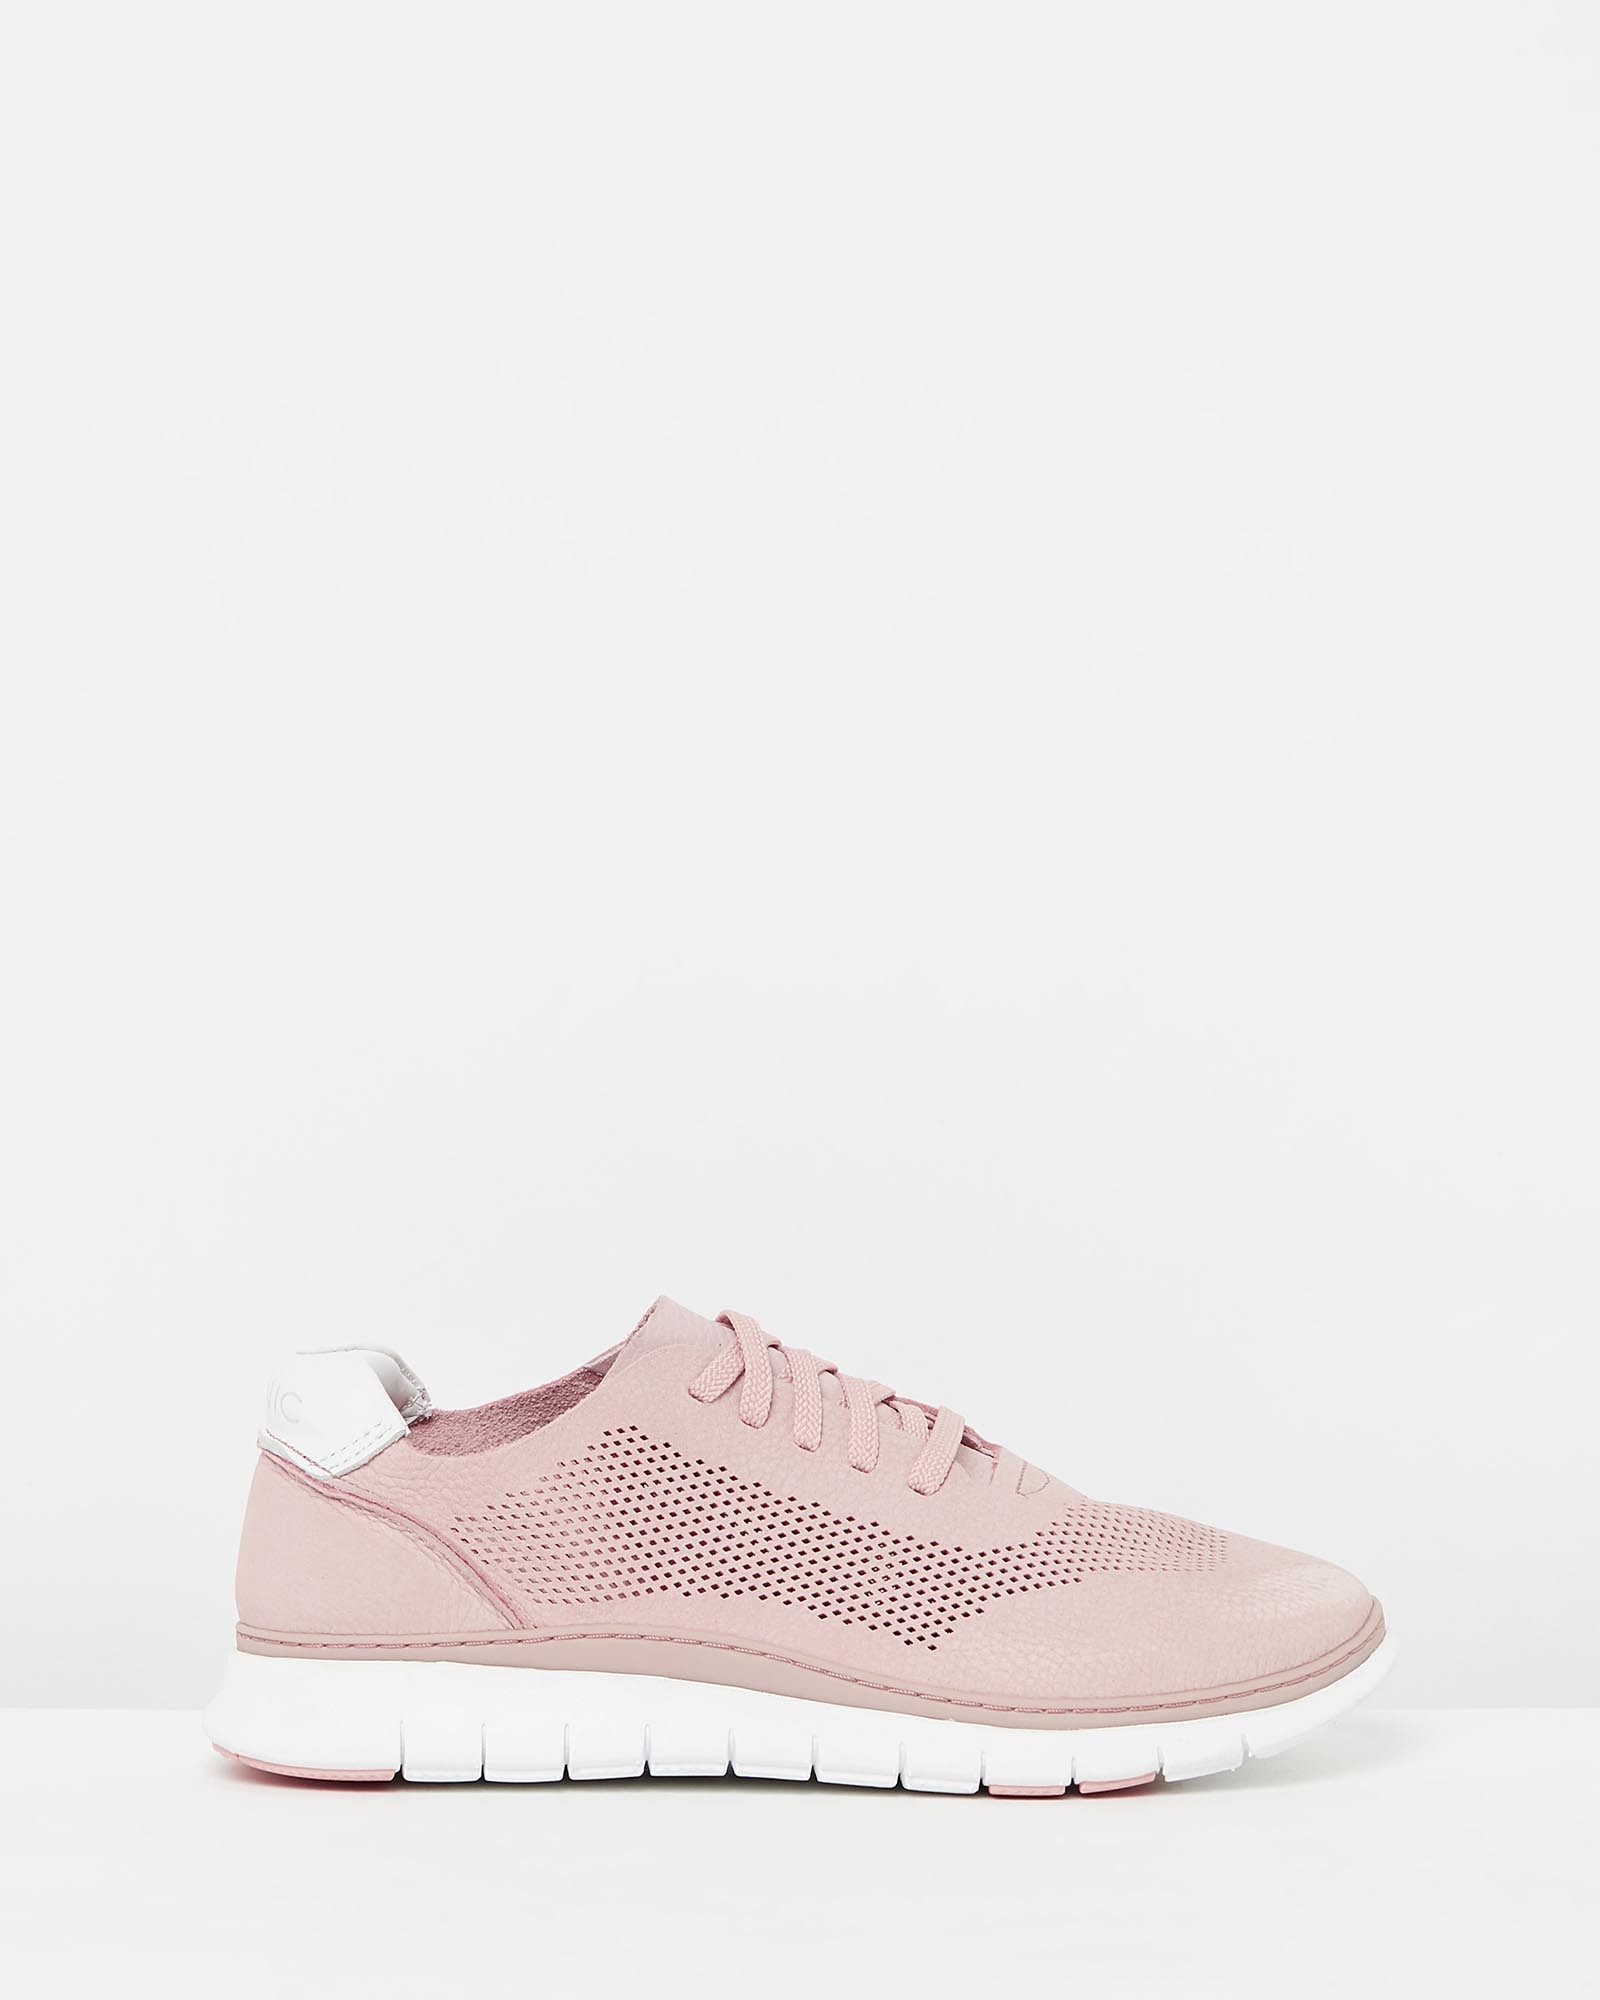 Joey Casual Sneakers Dusty Pink by Vionic | ShoeSales